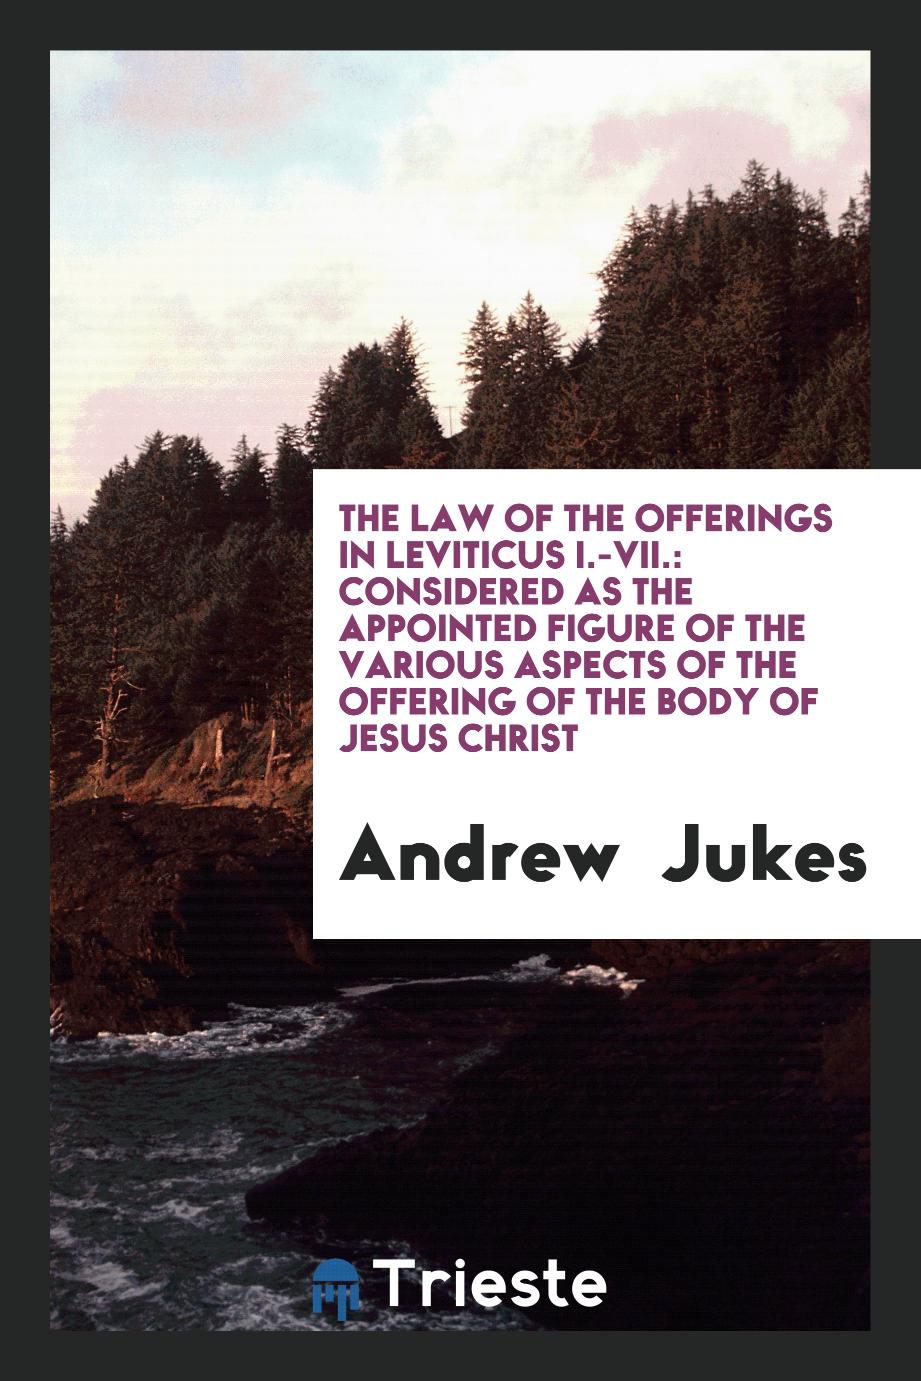 The law of the offerings in Leviticus I.-VII.: considered as the appointed figure of the various aspects of the offering of the body of Jesus Christ